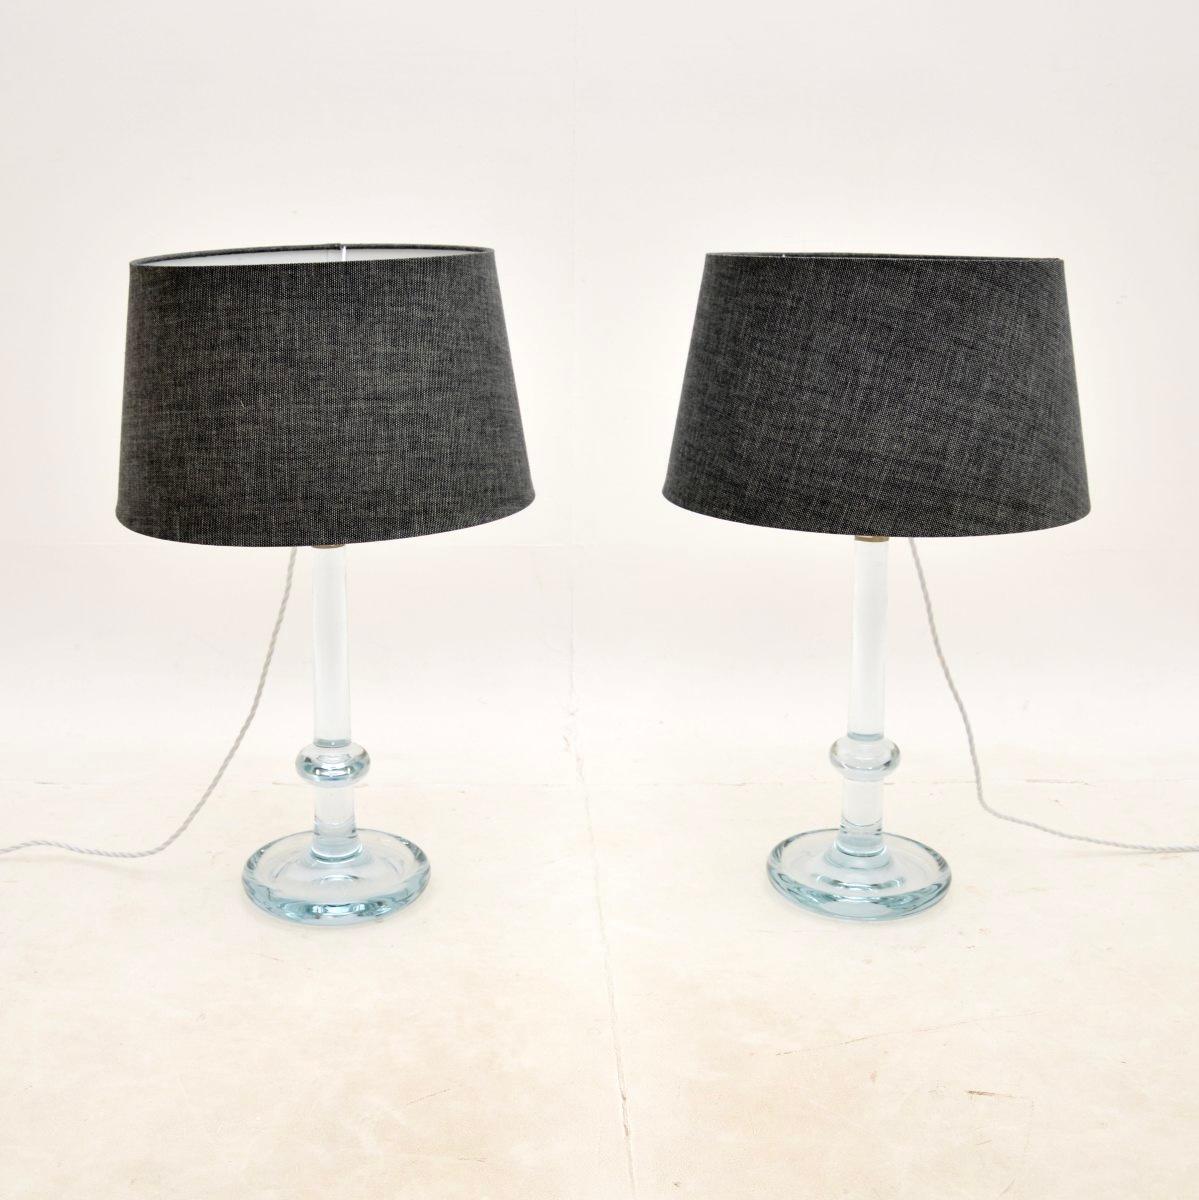 A stunning pair of Danish vintage glass table lamps by Michael Bang for Holmegaard. They were made in Denmark, they date from around the 1960-70’s.

The quality is superb and they are beautifully designed. The clear glass stands have a very slightly